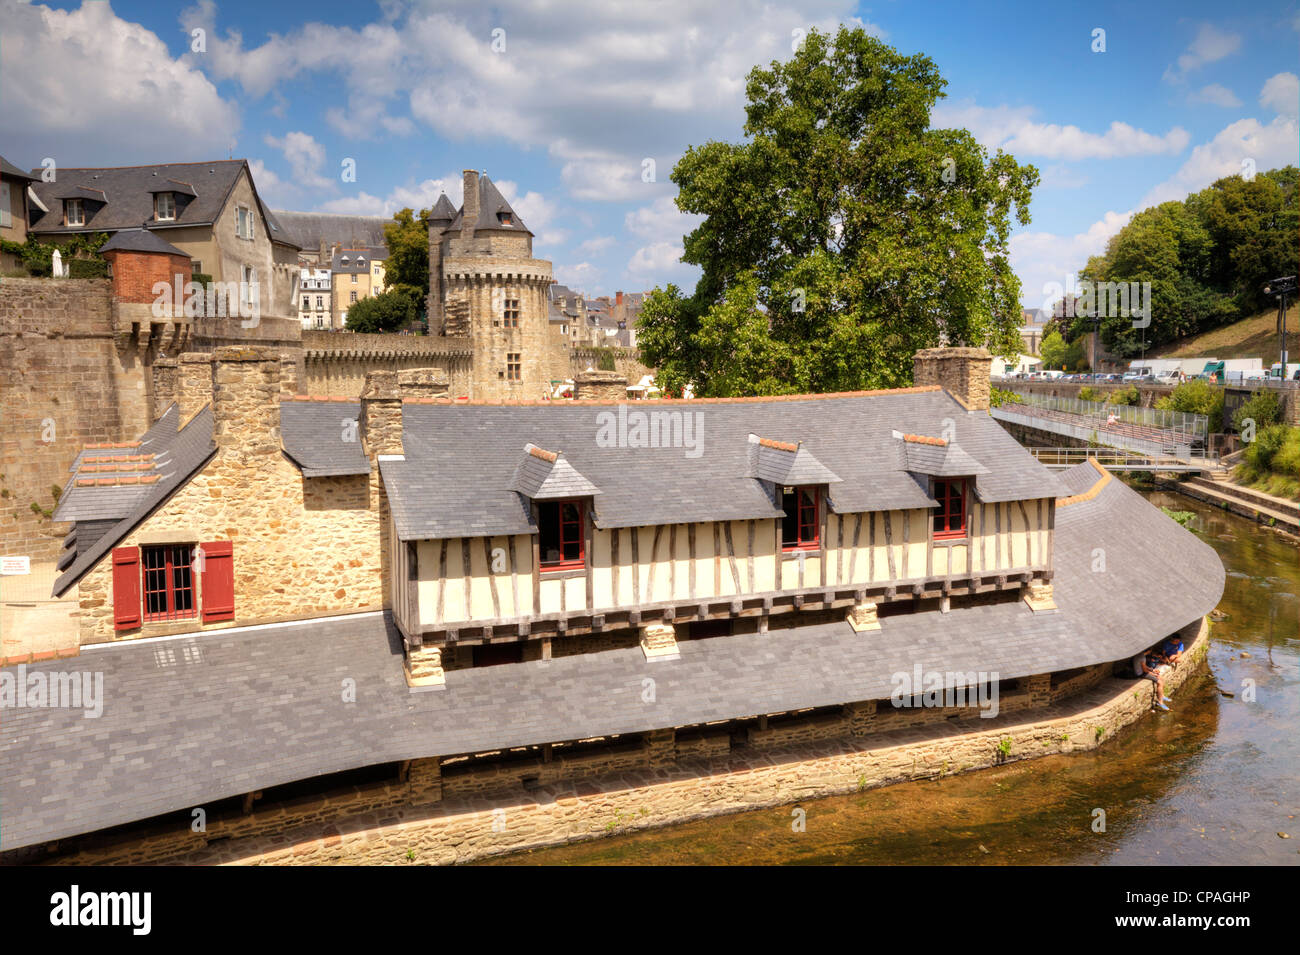 The old wash house in the medieval city of Vannes, Brittany, France. Stock Photo